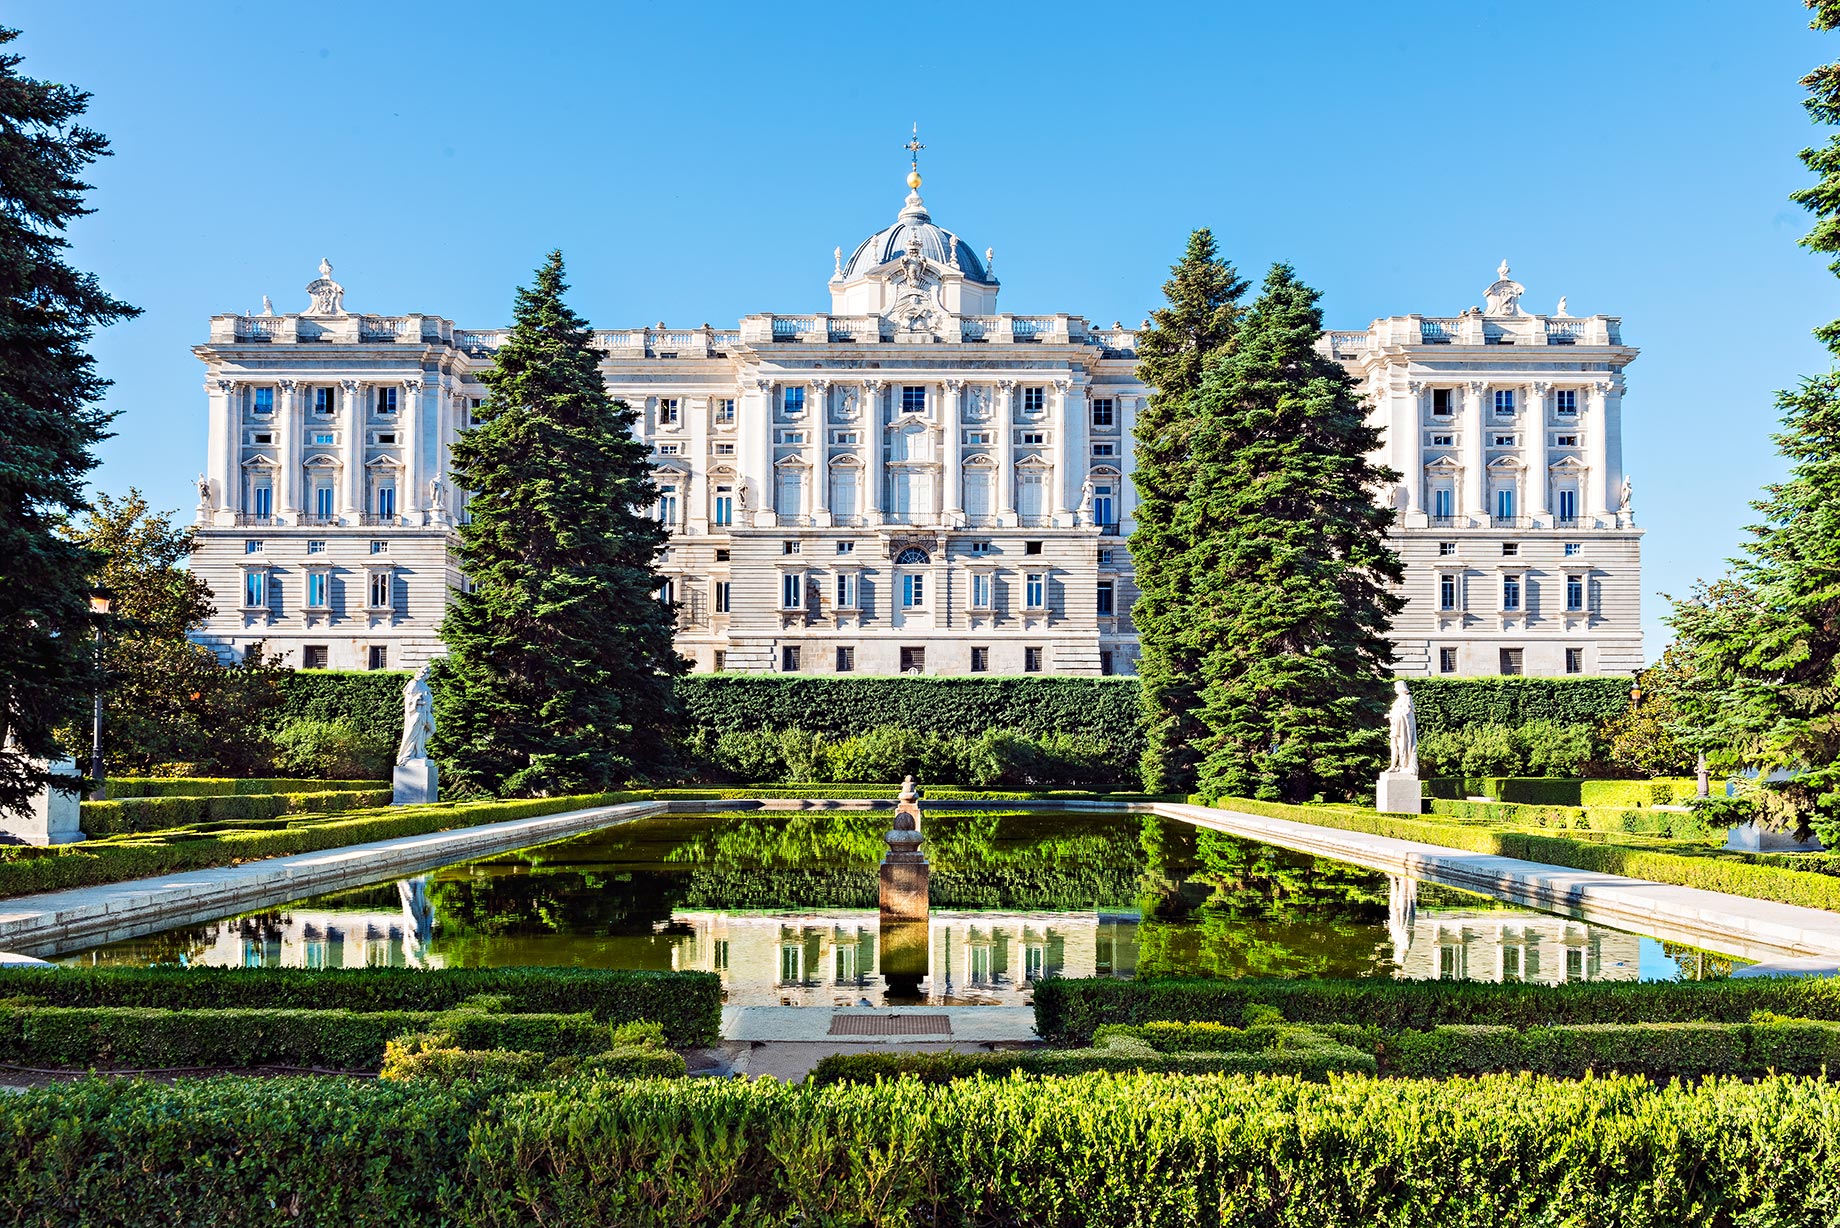 The Royal Palace of Madrid: Spain's Regal Residence